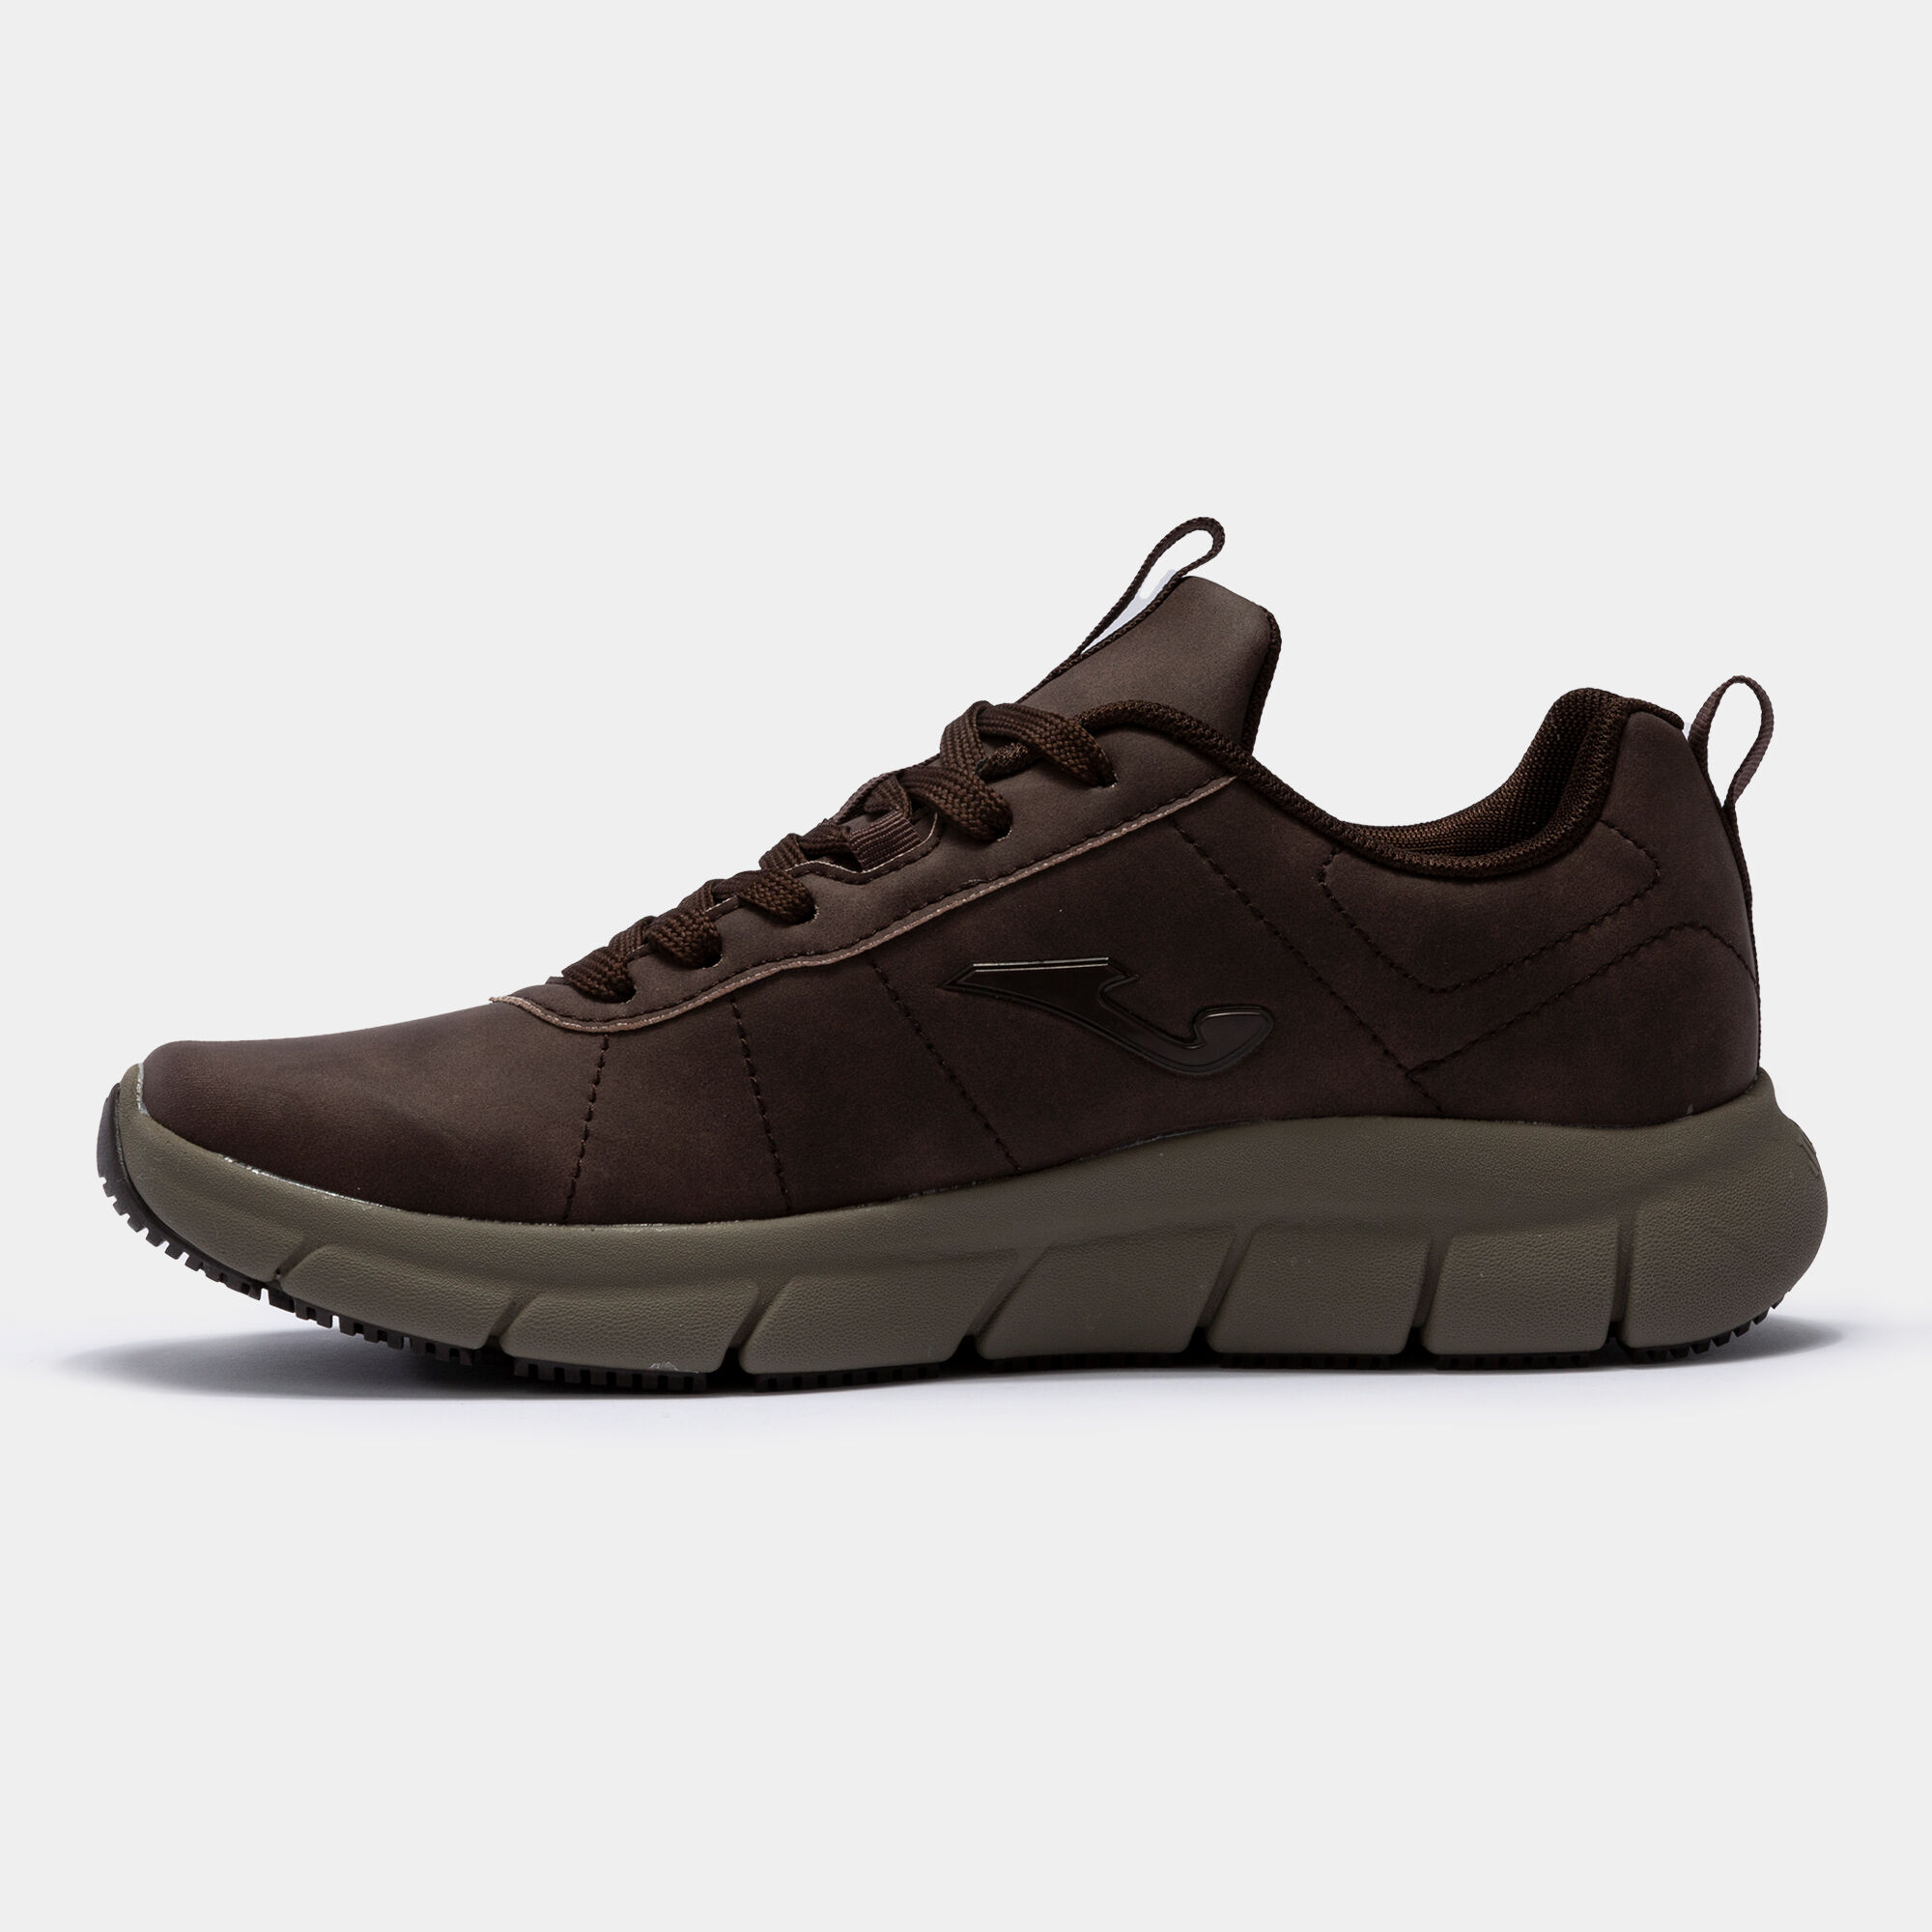 CHAUSSURES CASUAL DAILY 22 HOMME MARRON